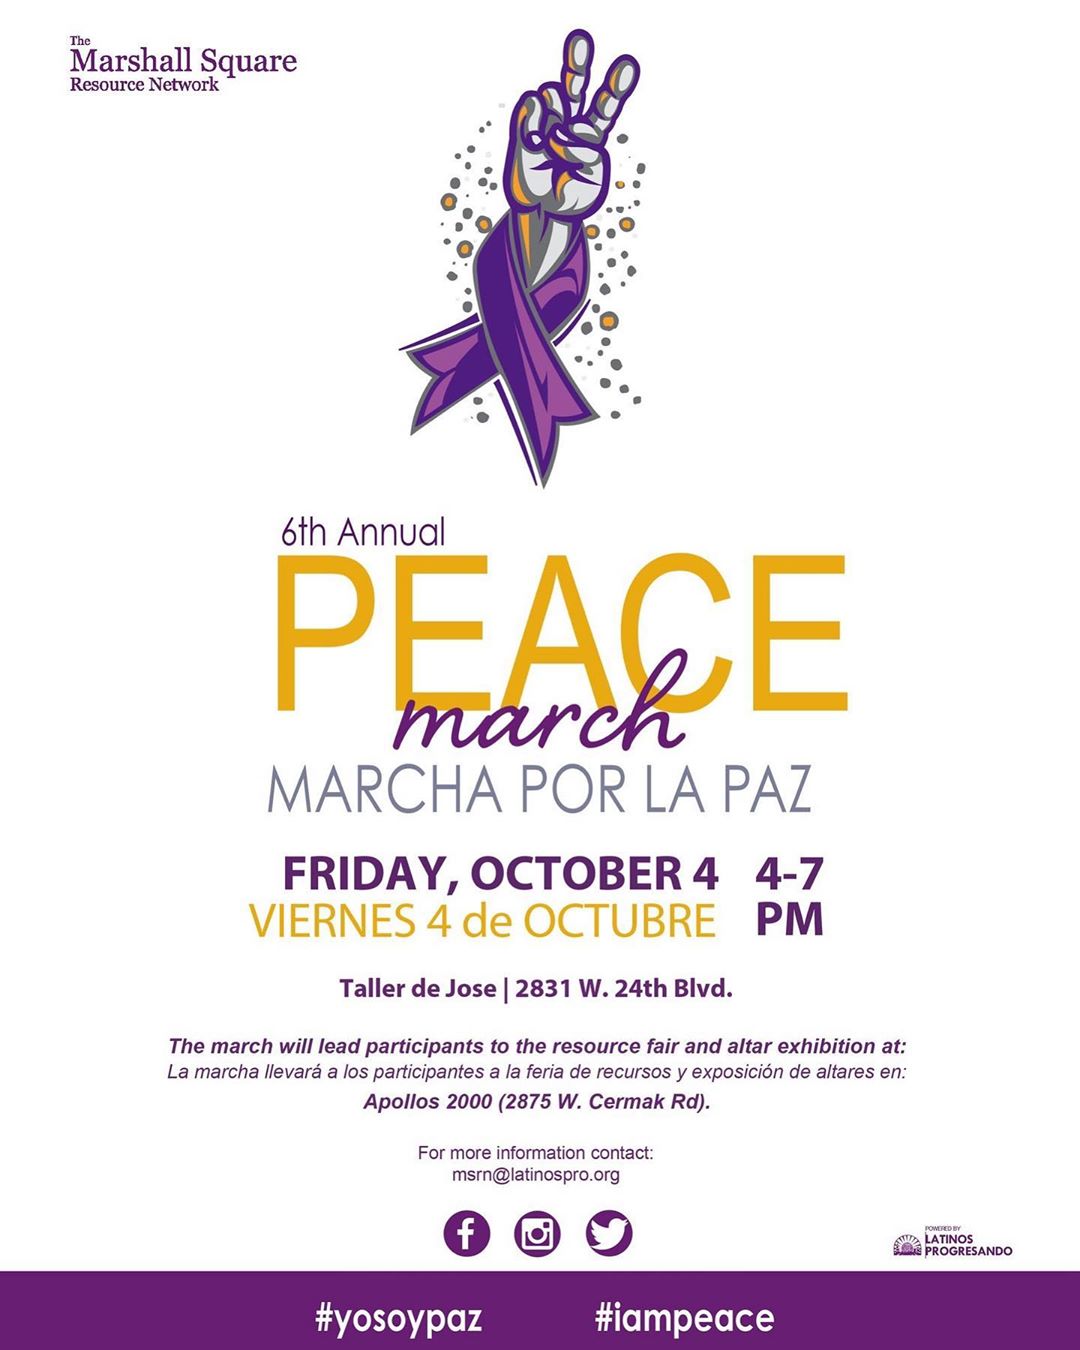 Join us on October 4th, or sign up to be a volunteer by contacting msrn@latinospro.org. In connection with #DVAM, the annual Marshall Square Peace March mobilizes the community in the promotion of peace, while also forming important bonds community residents and community organizations.